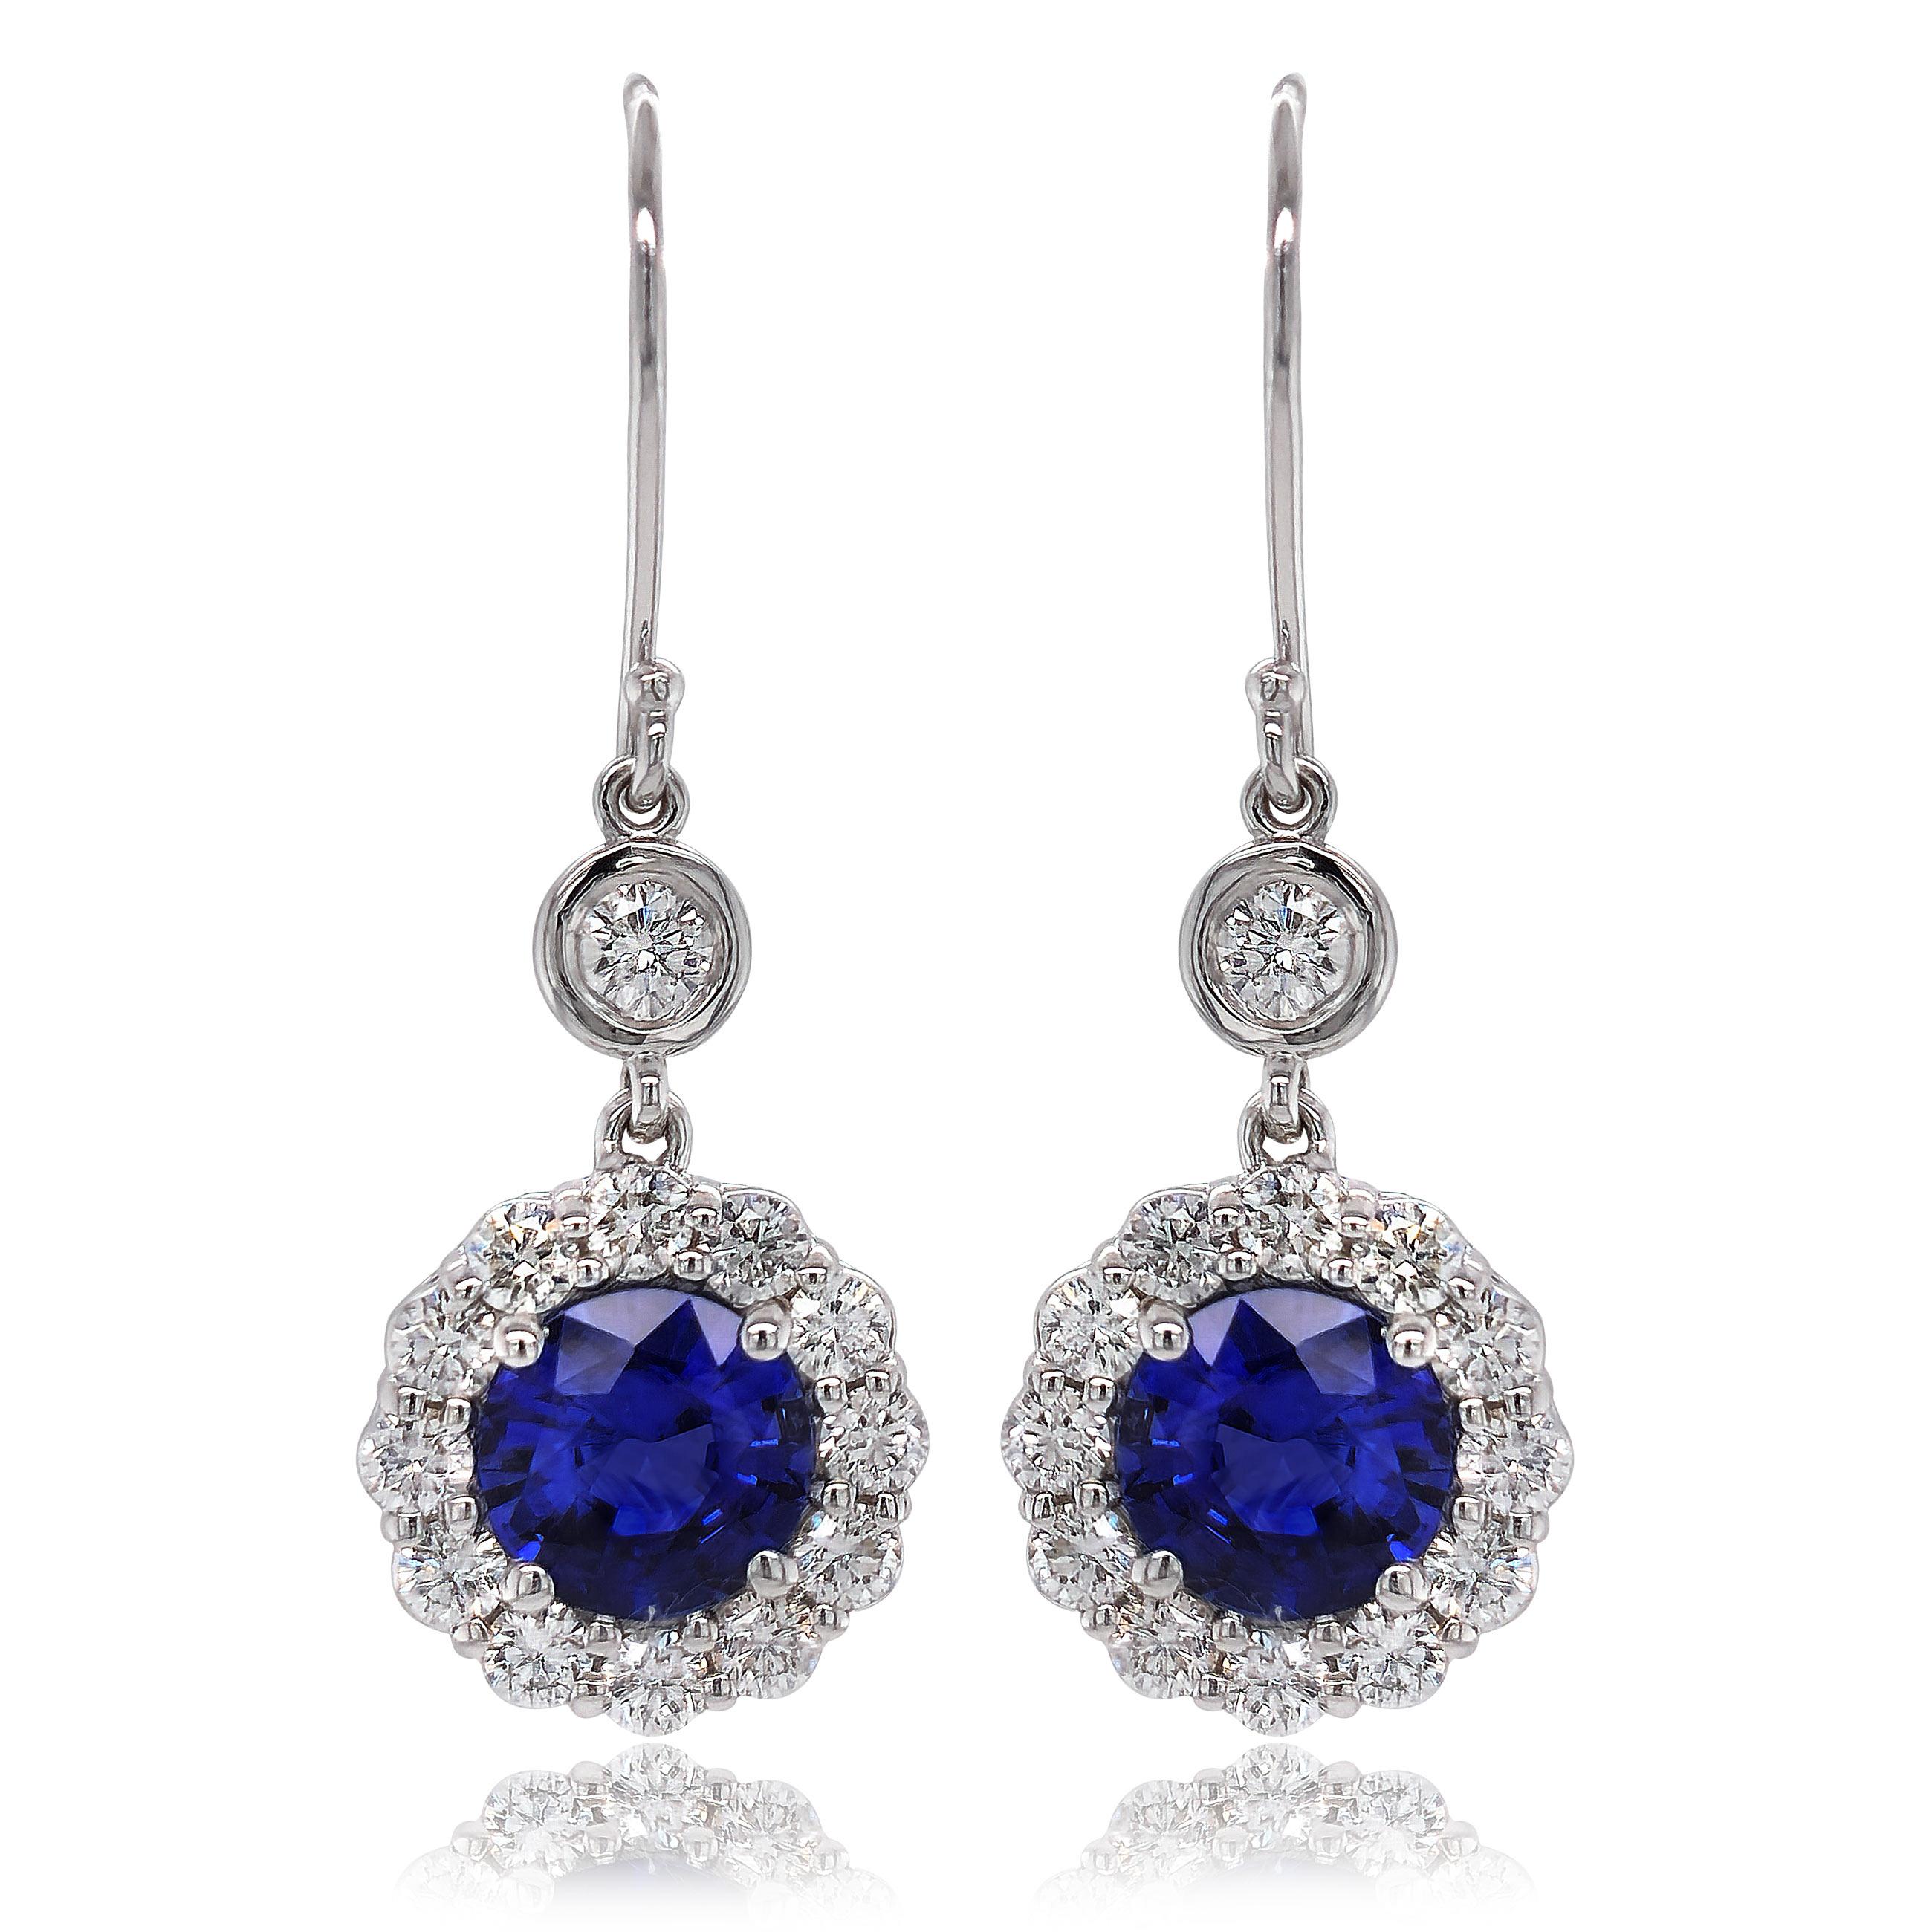 Mixed Cut Natural Blue Sapphires 2.24 Carats set in 18K White Gold Earrings with Diamonds For Sale